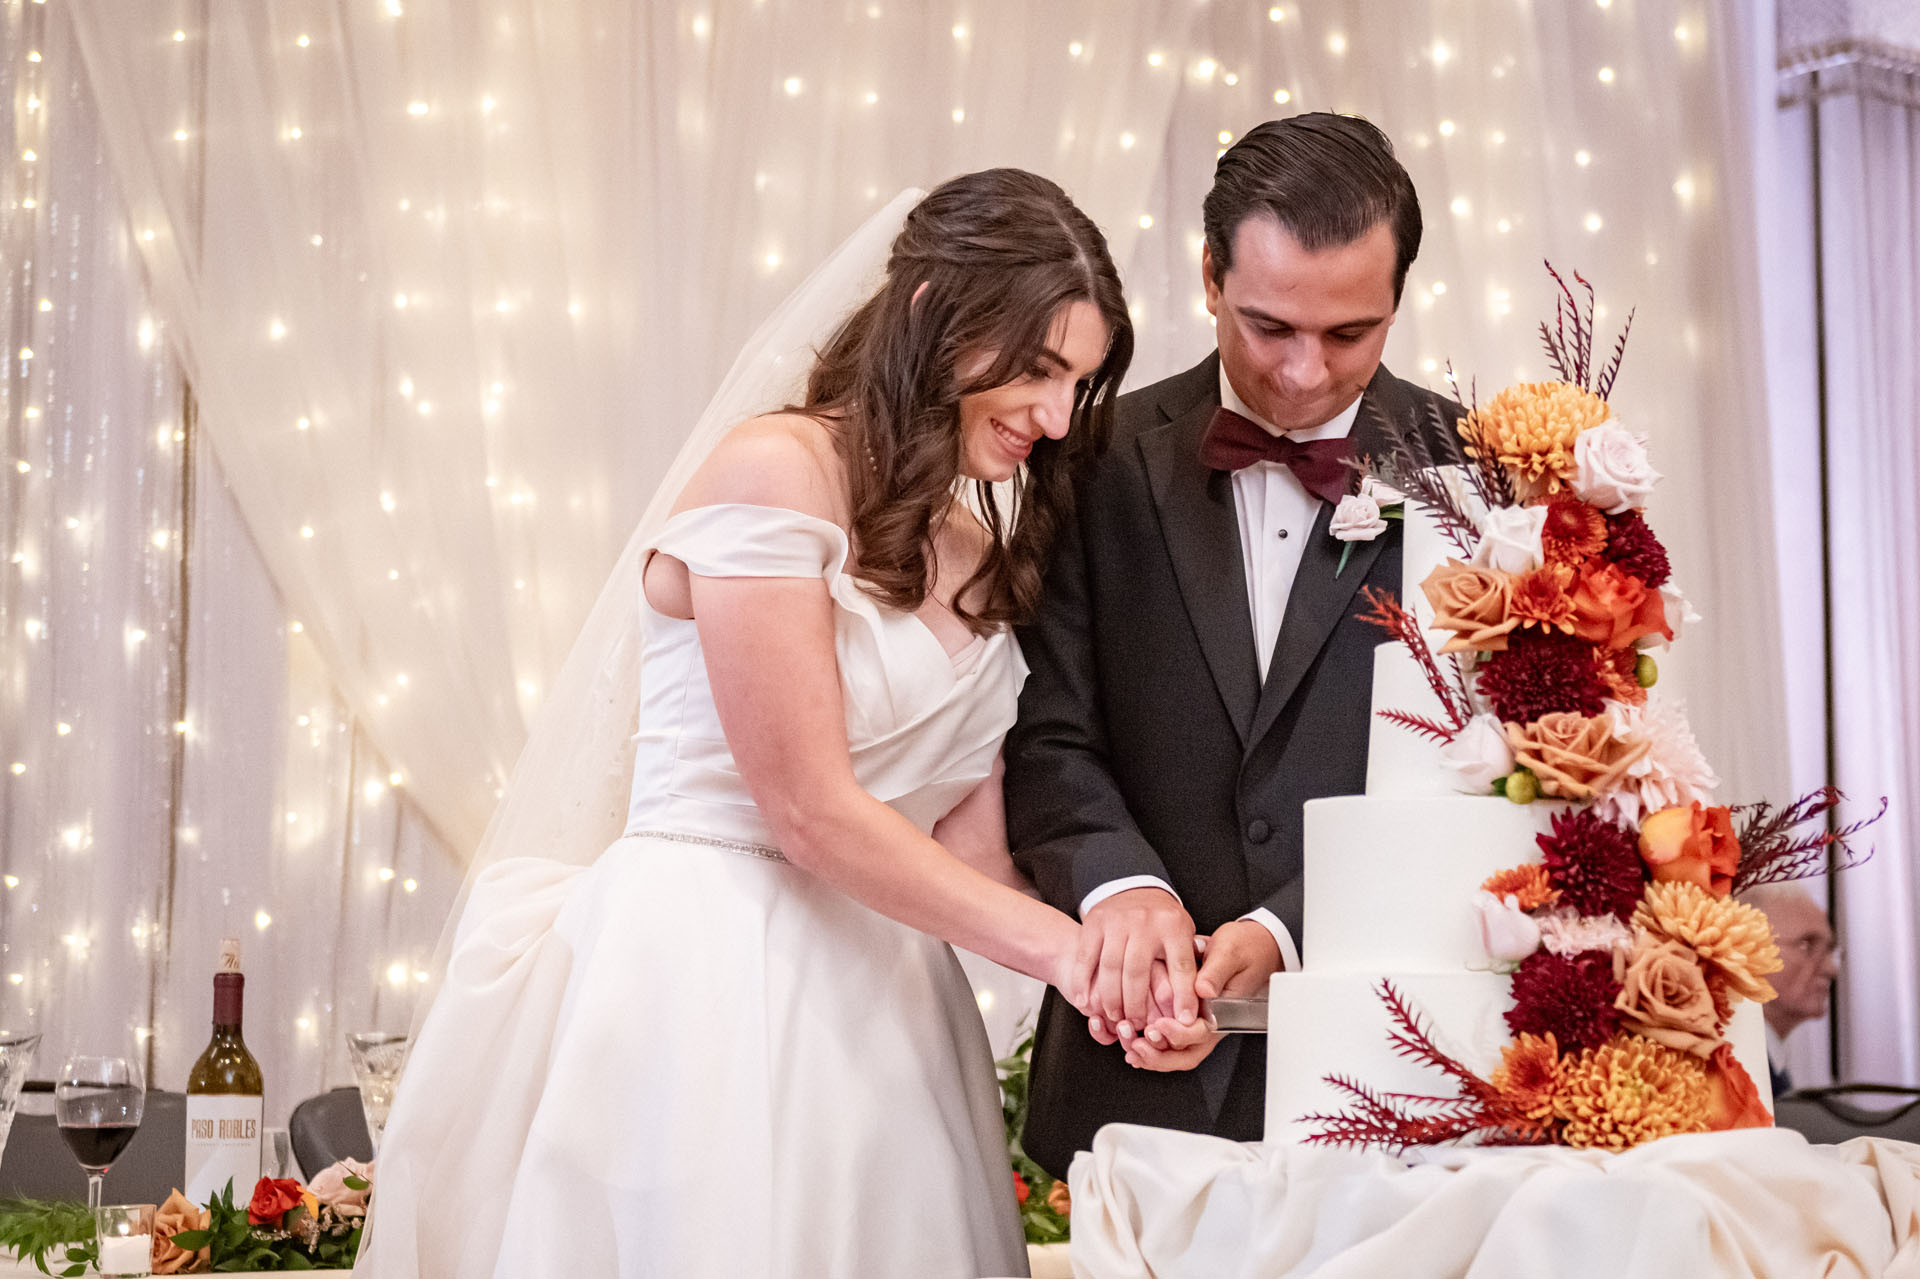 Smiling bride and groom cut autumn-themed wedding cake in front of sparkling backdrop 